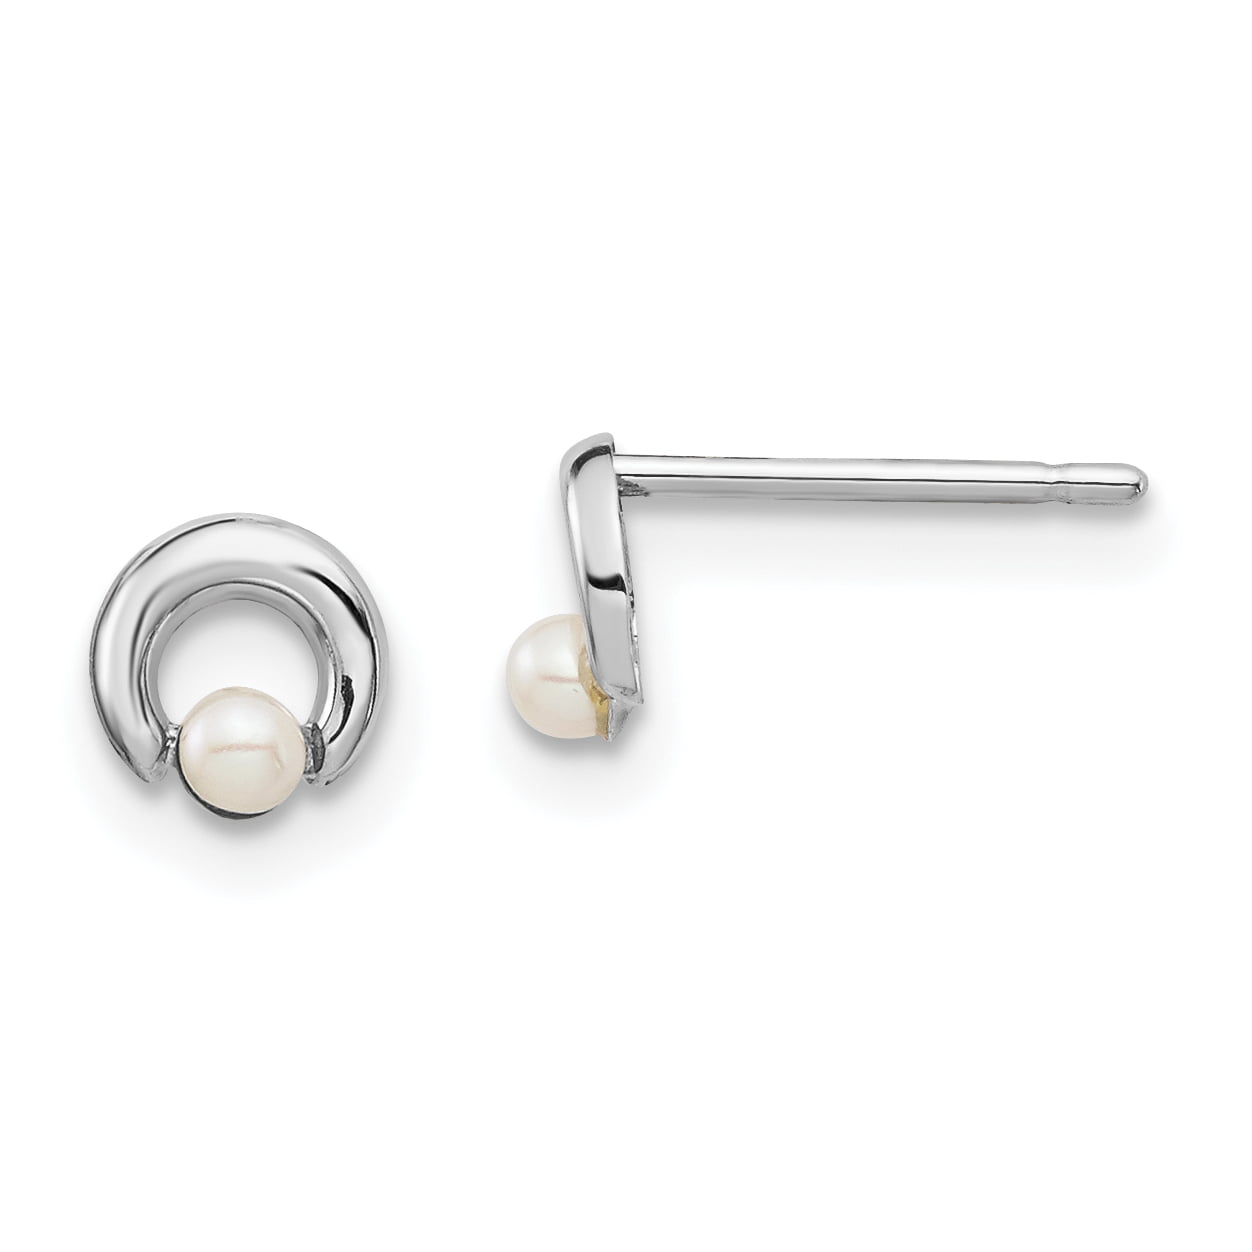 Details about   14k White Gold  Madi K Button Freshwater Cultured Pearl Circle Post Earrings 